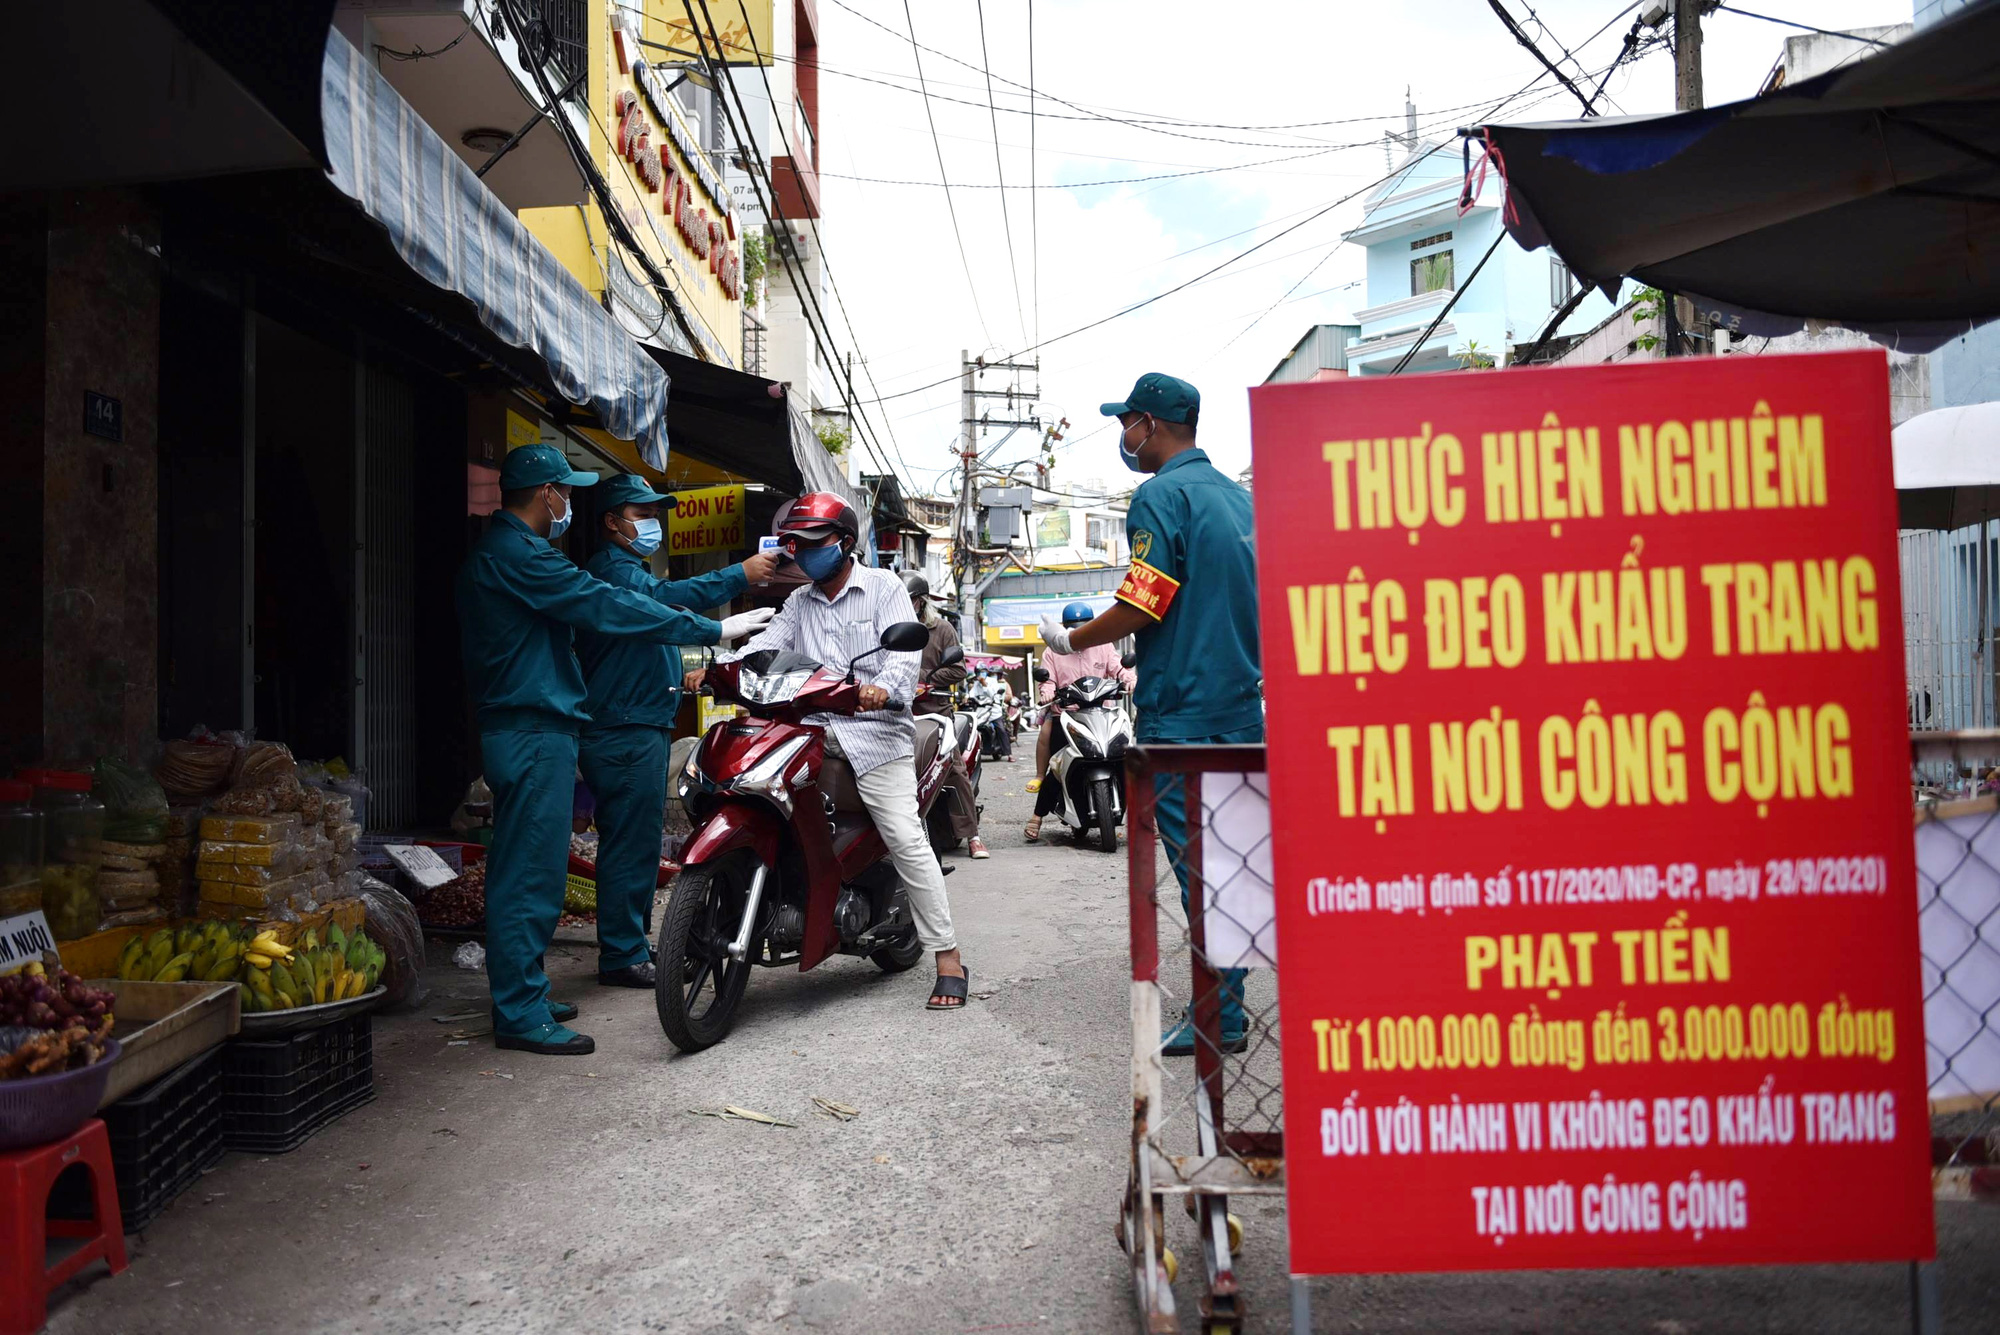 What are social distancing measures in Ho Chi Minh City?